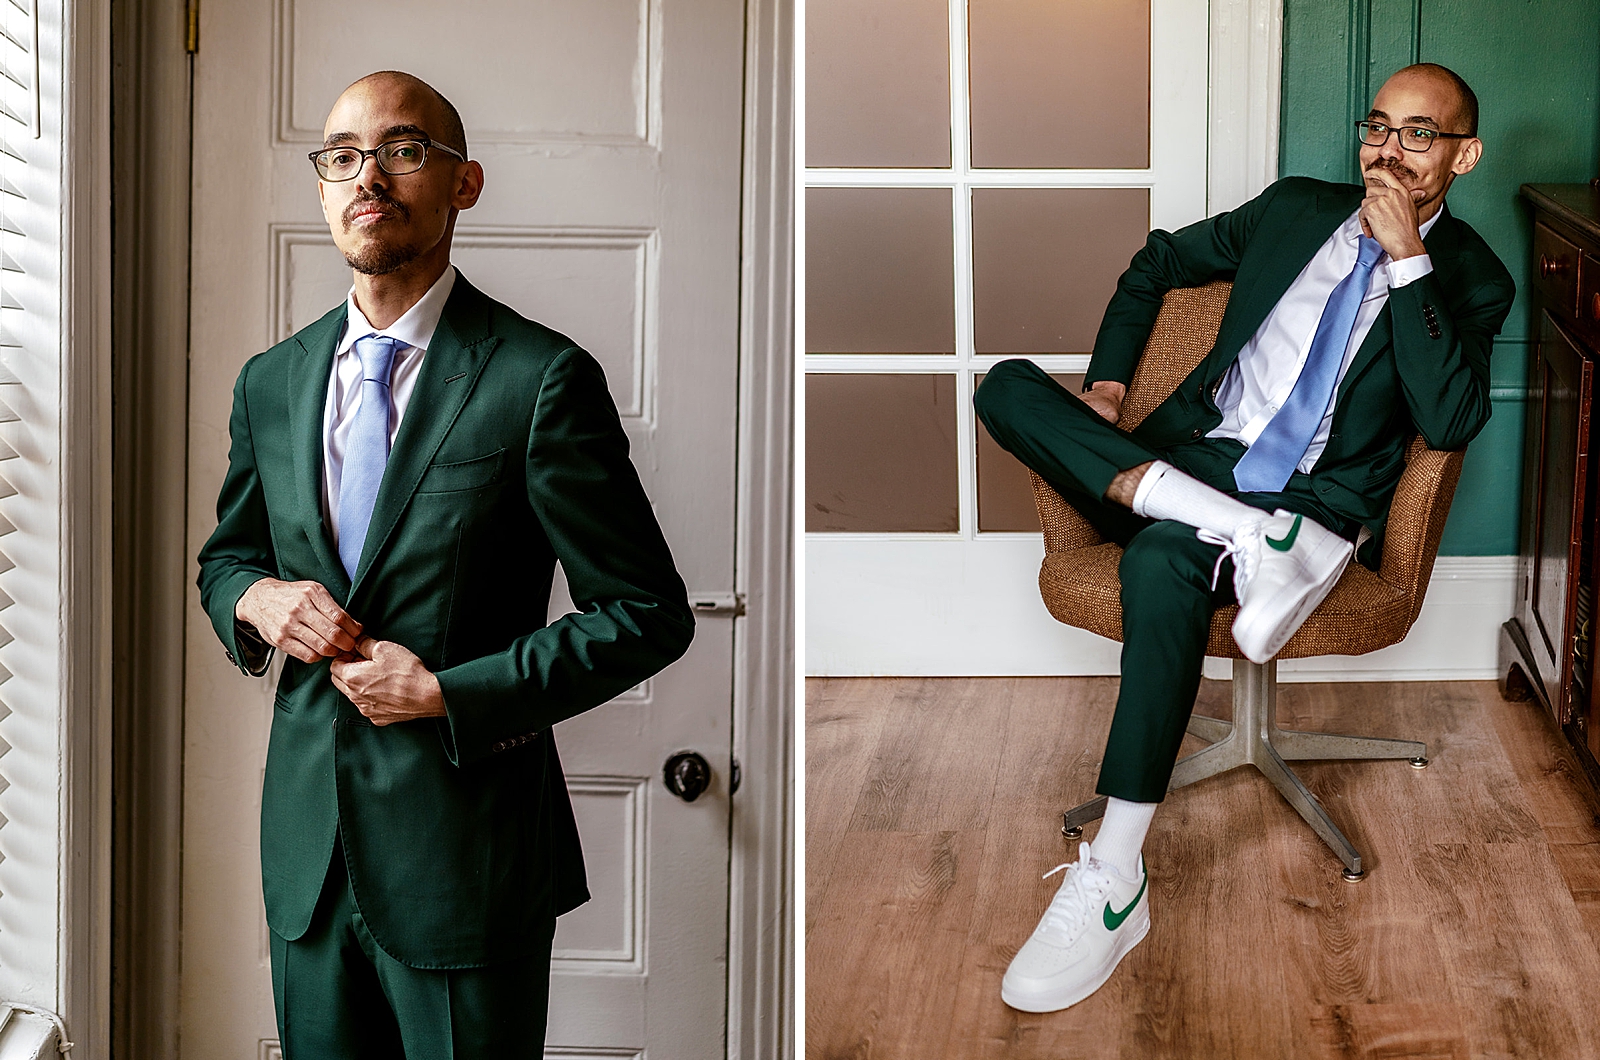 Left photo: Upper body shot of the groom buttoning his suit jacket.
Right photo: Full body shot of the groom posing in a chair. 